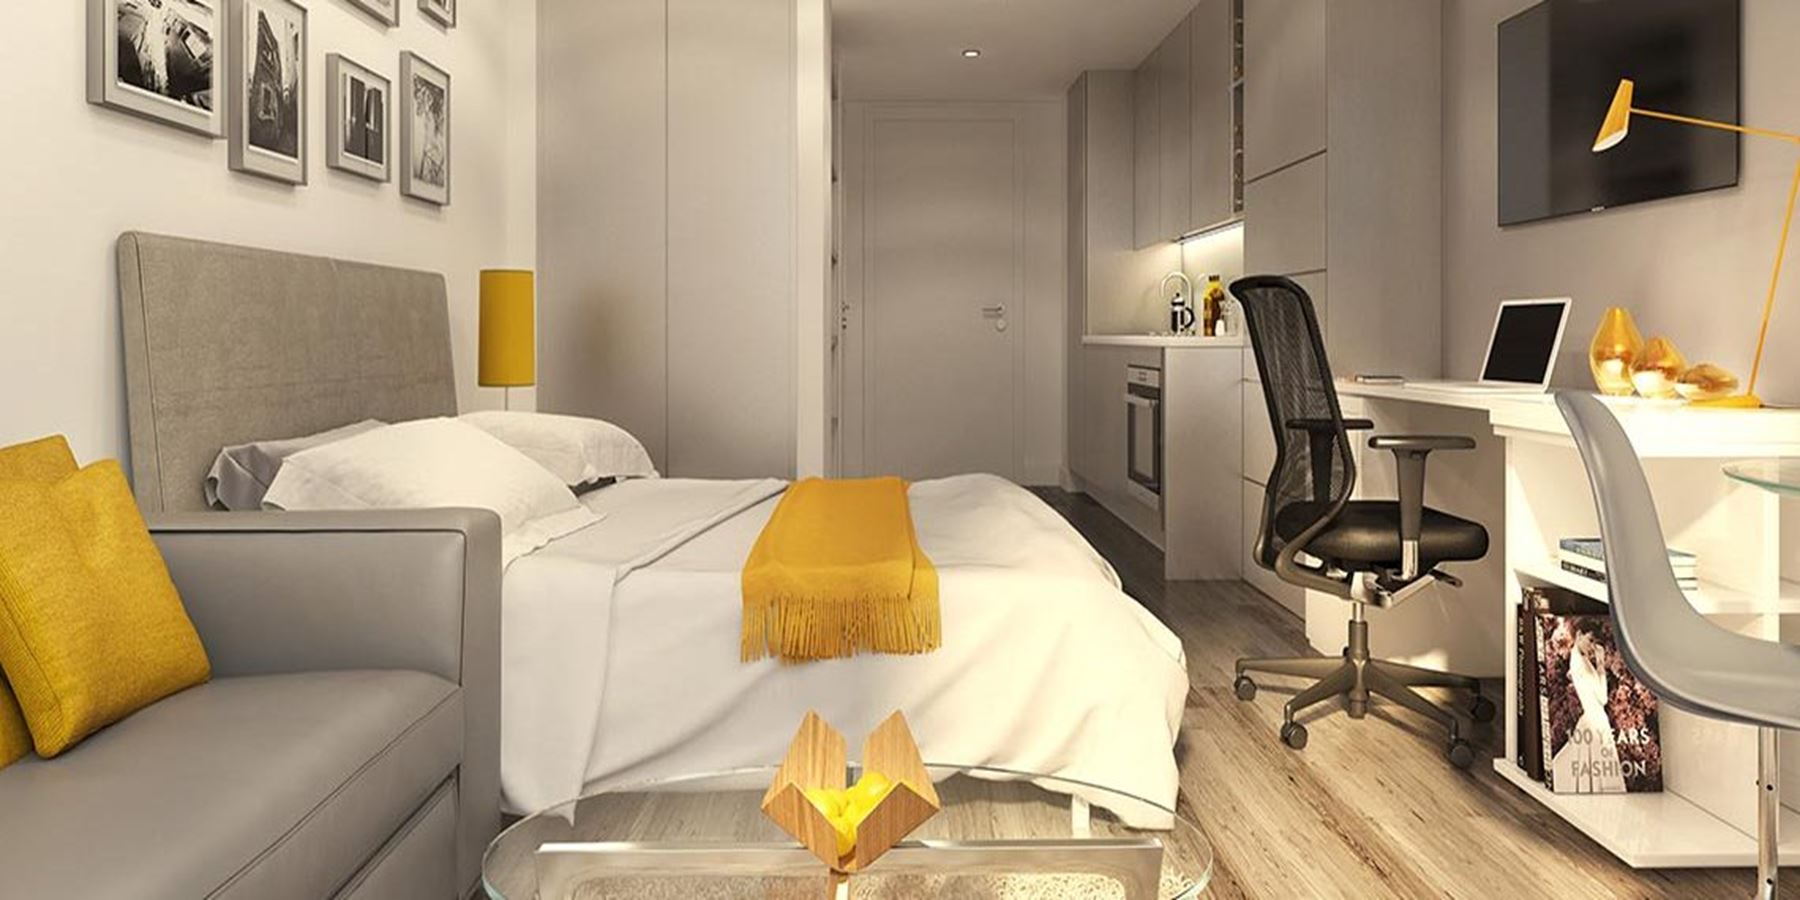 The rising demand for luxury student accommodation